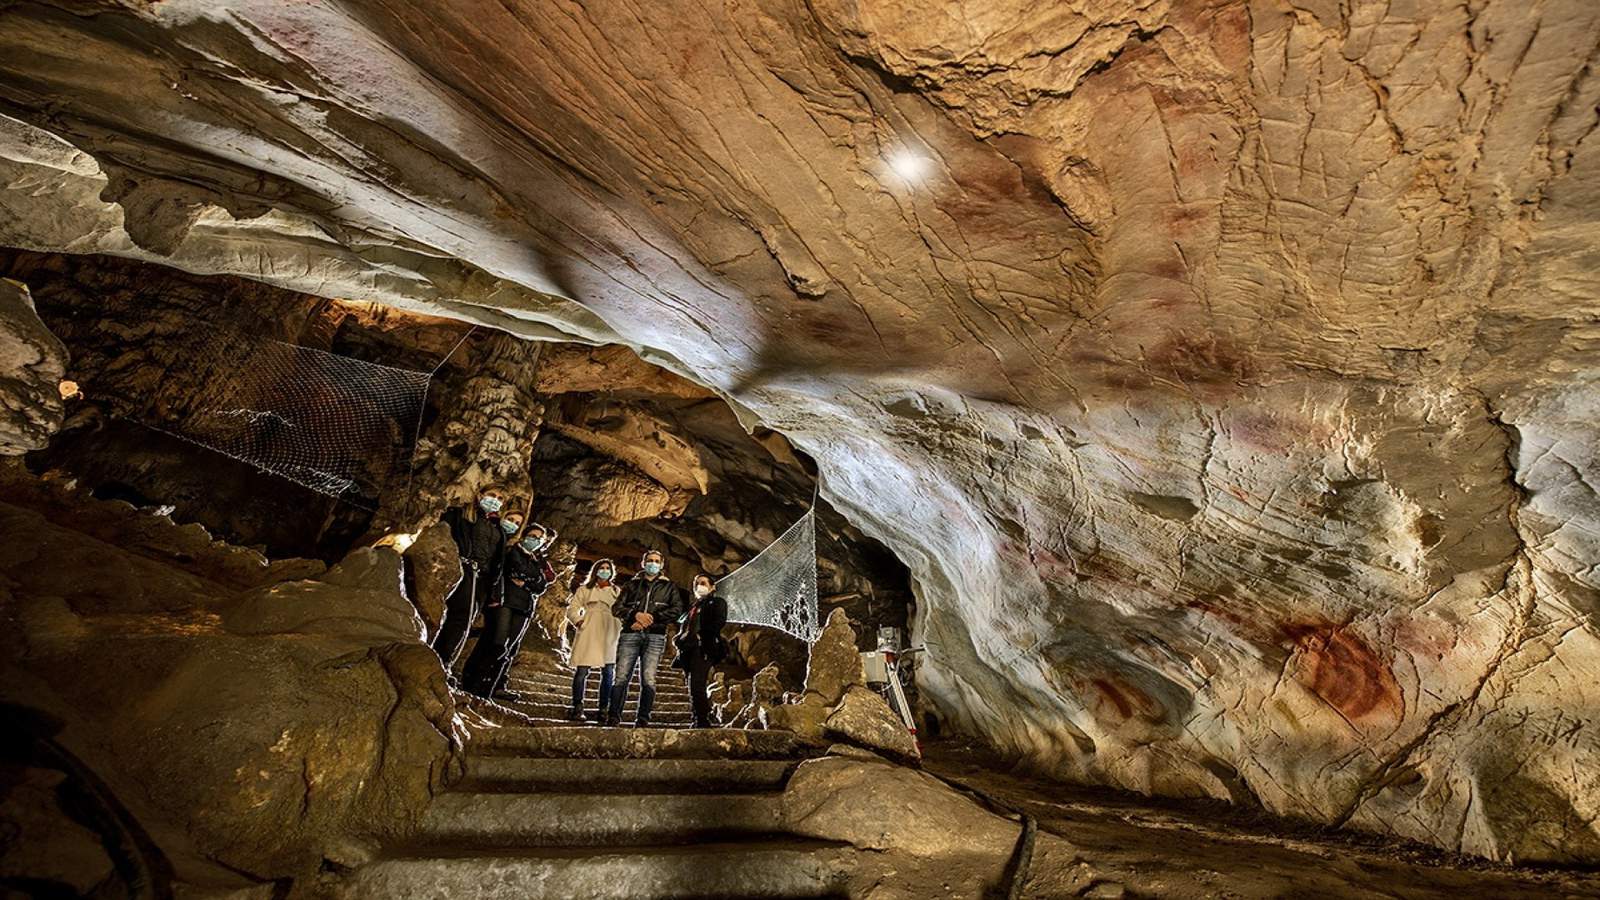 Can show caves in Texas and around the world survive after COVID-19?